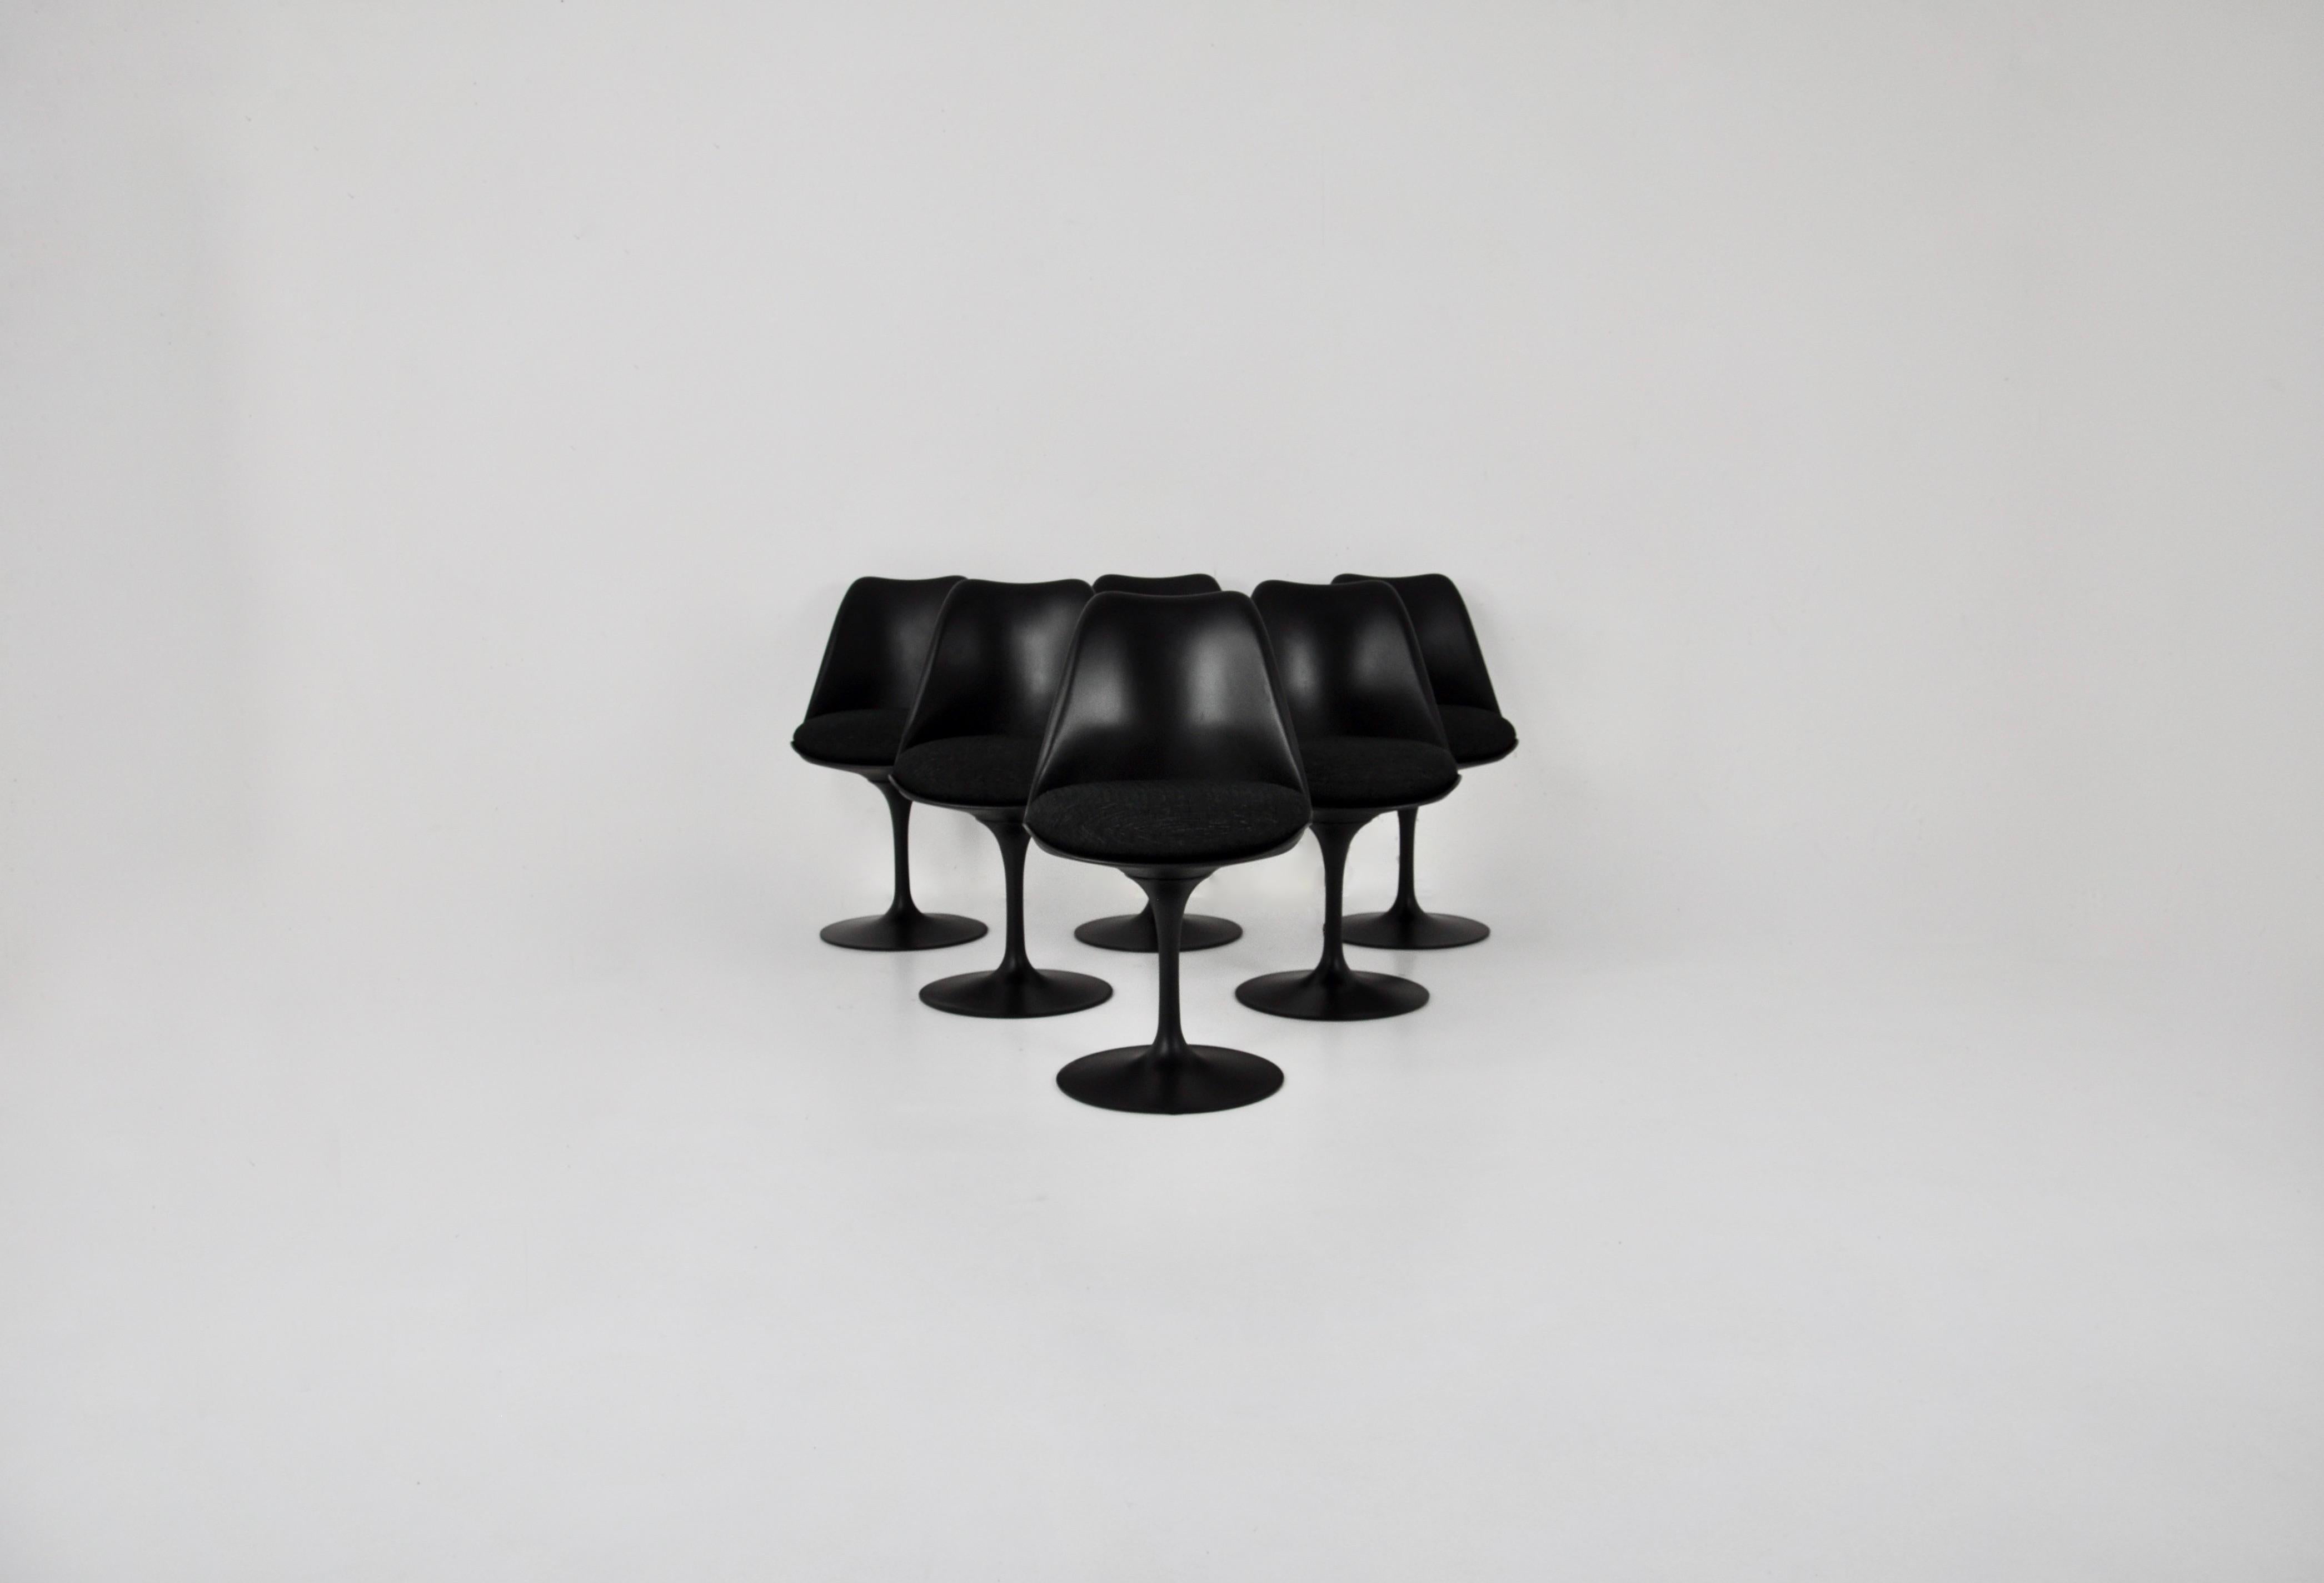 Set of 6 chairs in fibreglass, aluminium and fabric. Seat height 45 cm. The chairs are black and the fabric is black. Wear and tear due to time and age of the chairs.